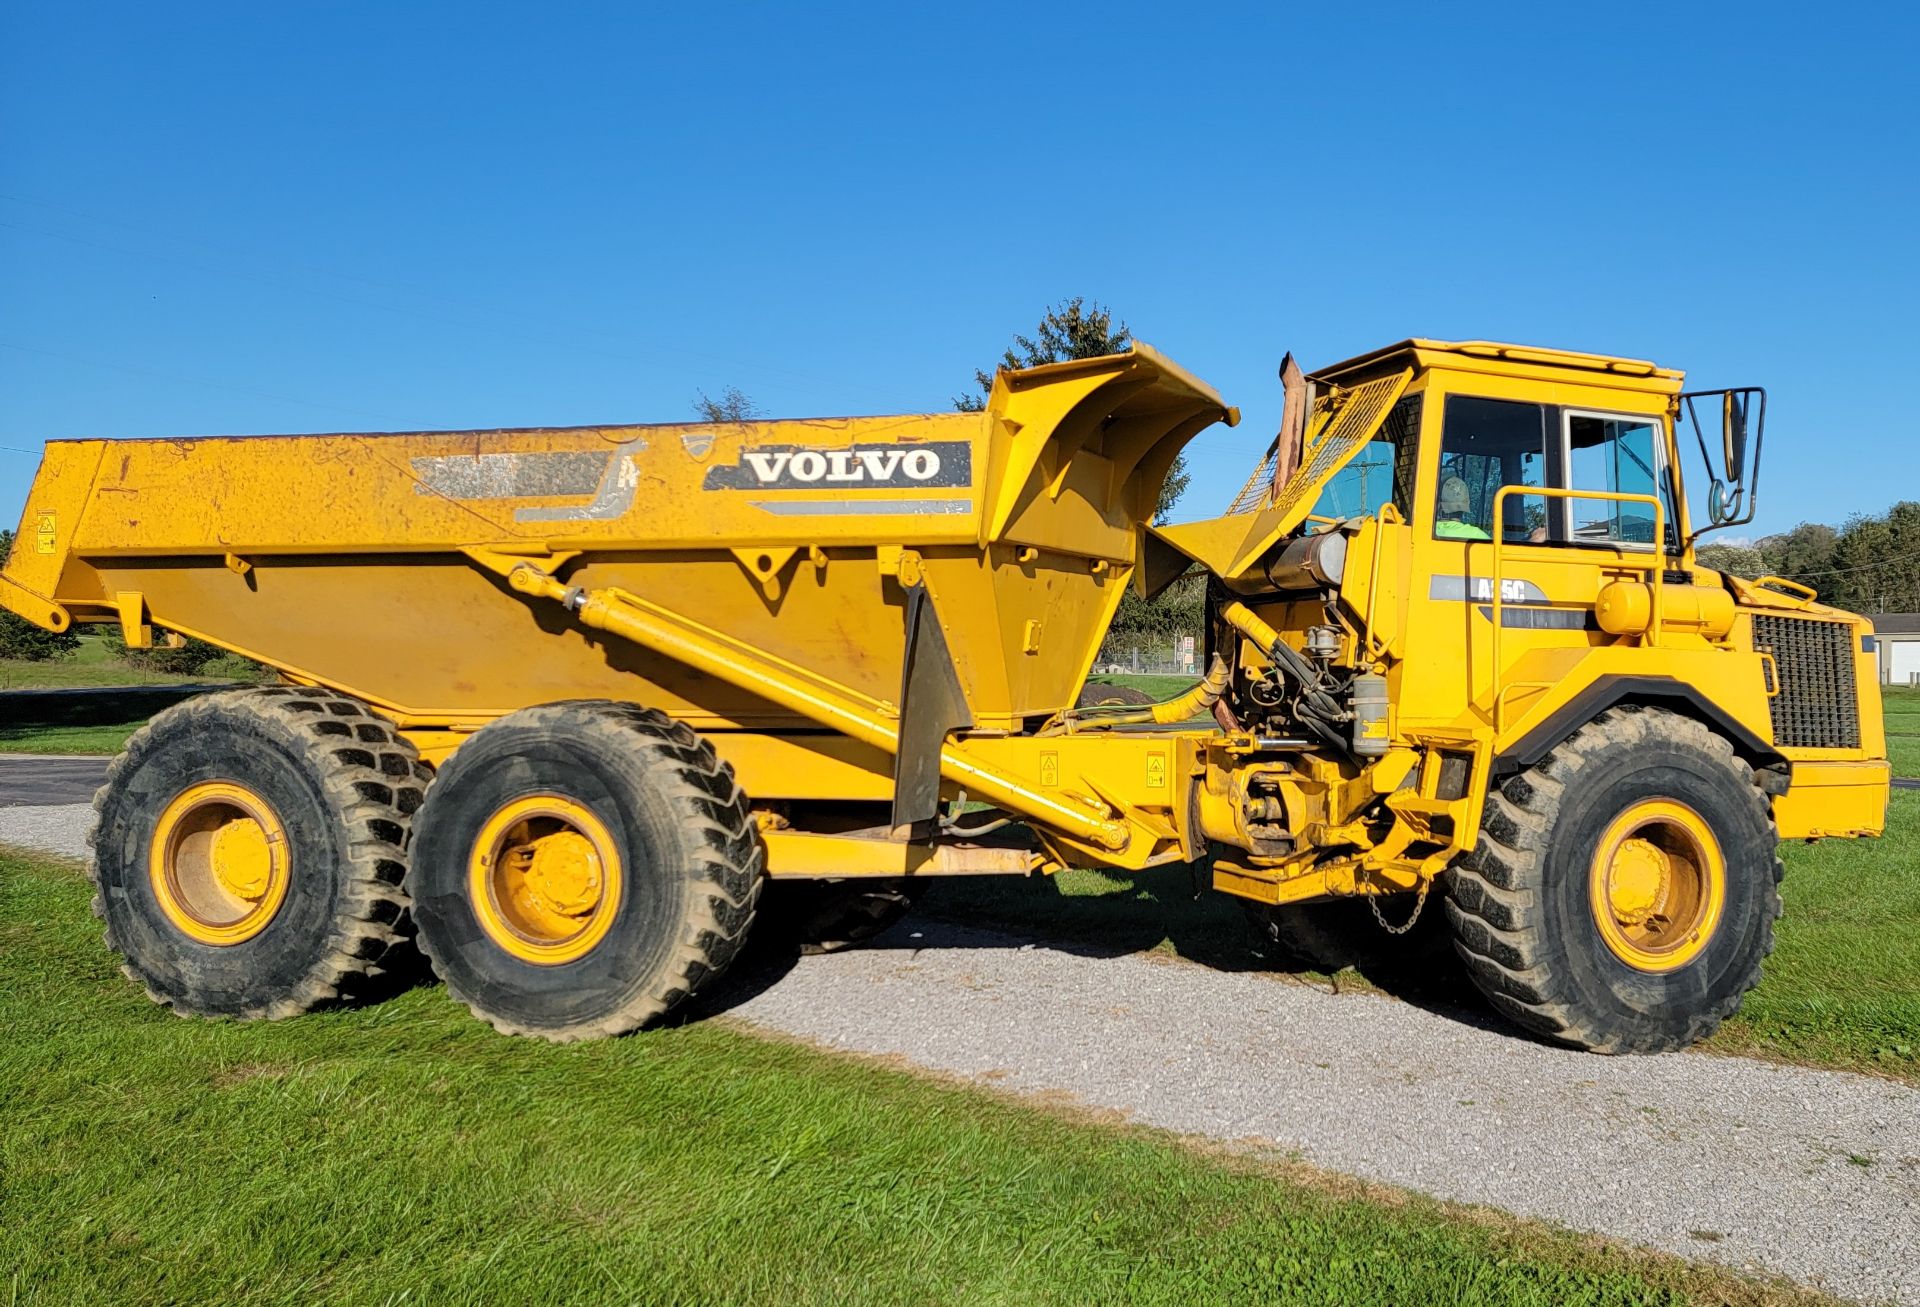 Volvo A25C 6x6 Offroad Dump Truck, 30,519 Miles, 12,411 Hours, s/n 5350V61011 - Image 16 of 34